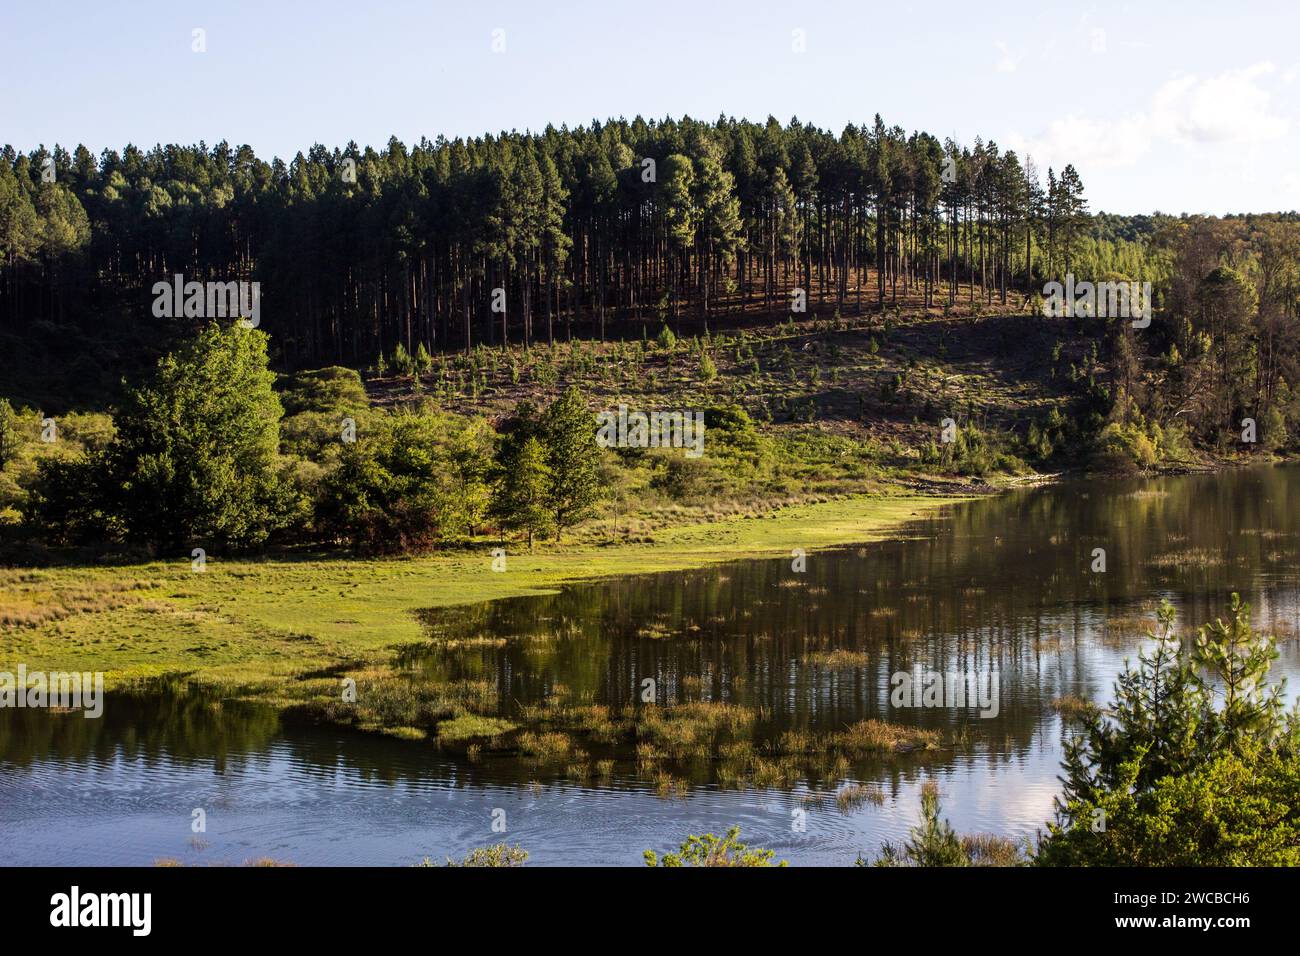 Reflection of a pine plantation in Dap Naude Dam, a small fishing dam on a clear sunny day in Magoebaskloof, South Africa. Stock Photo